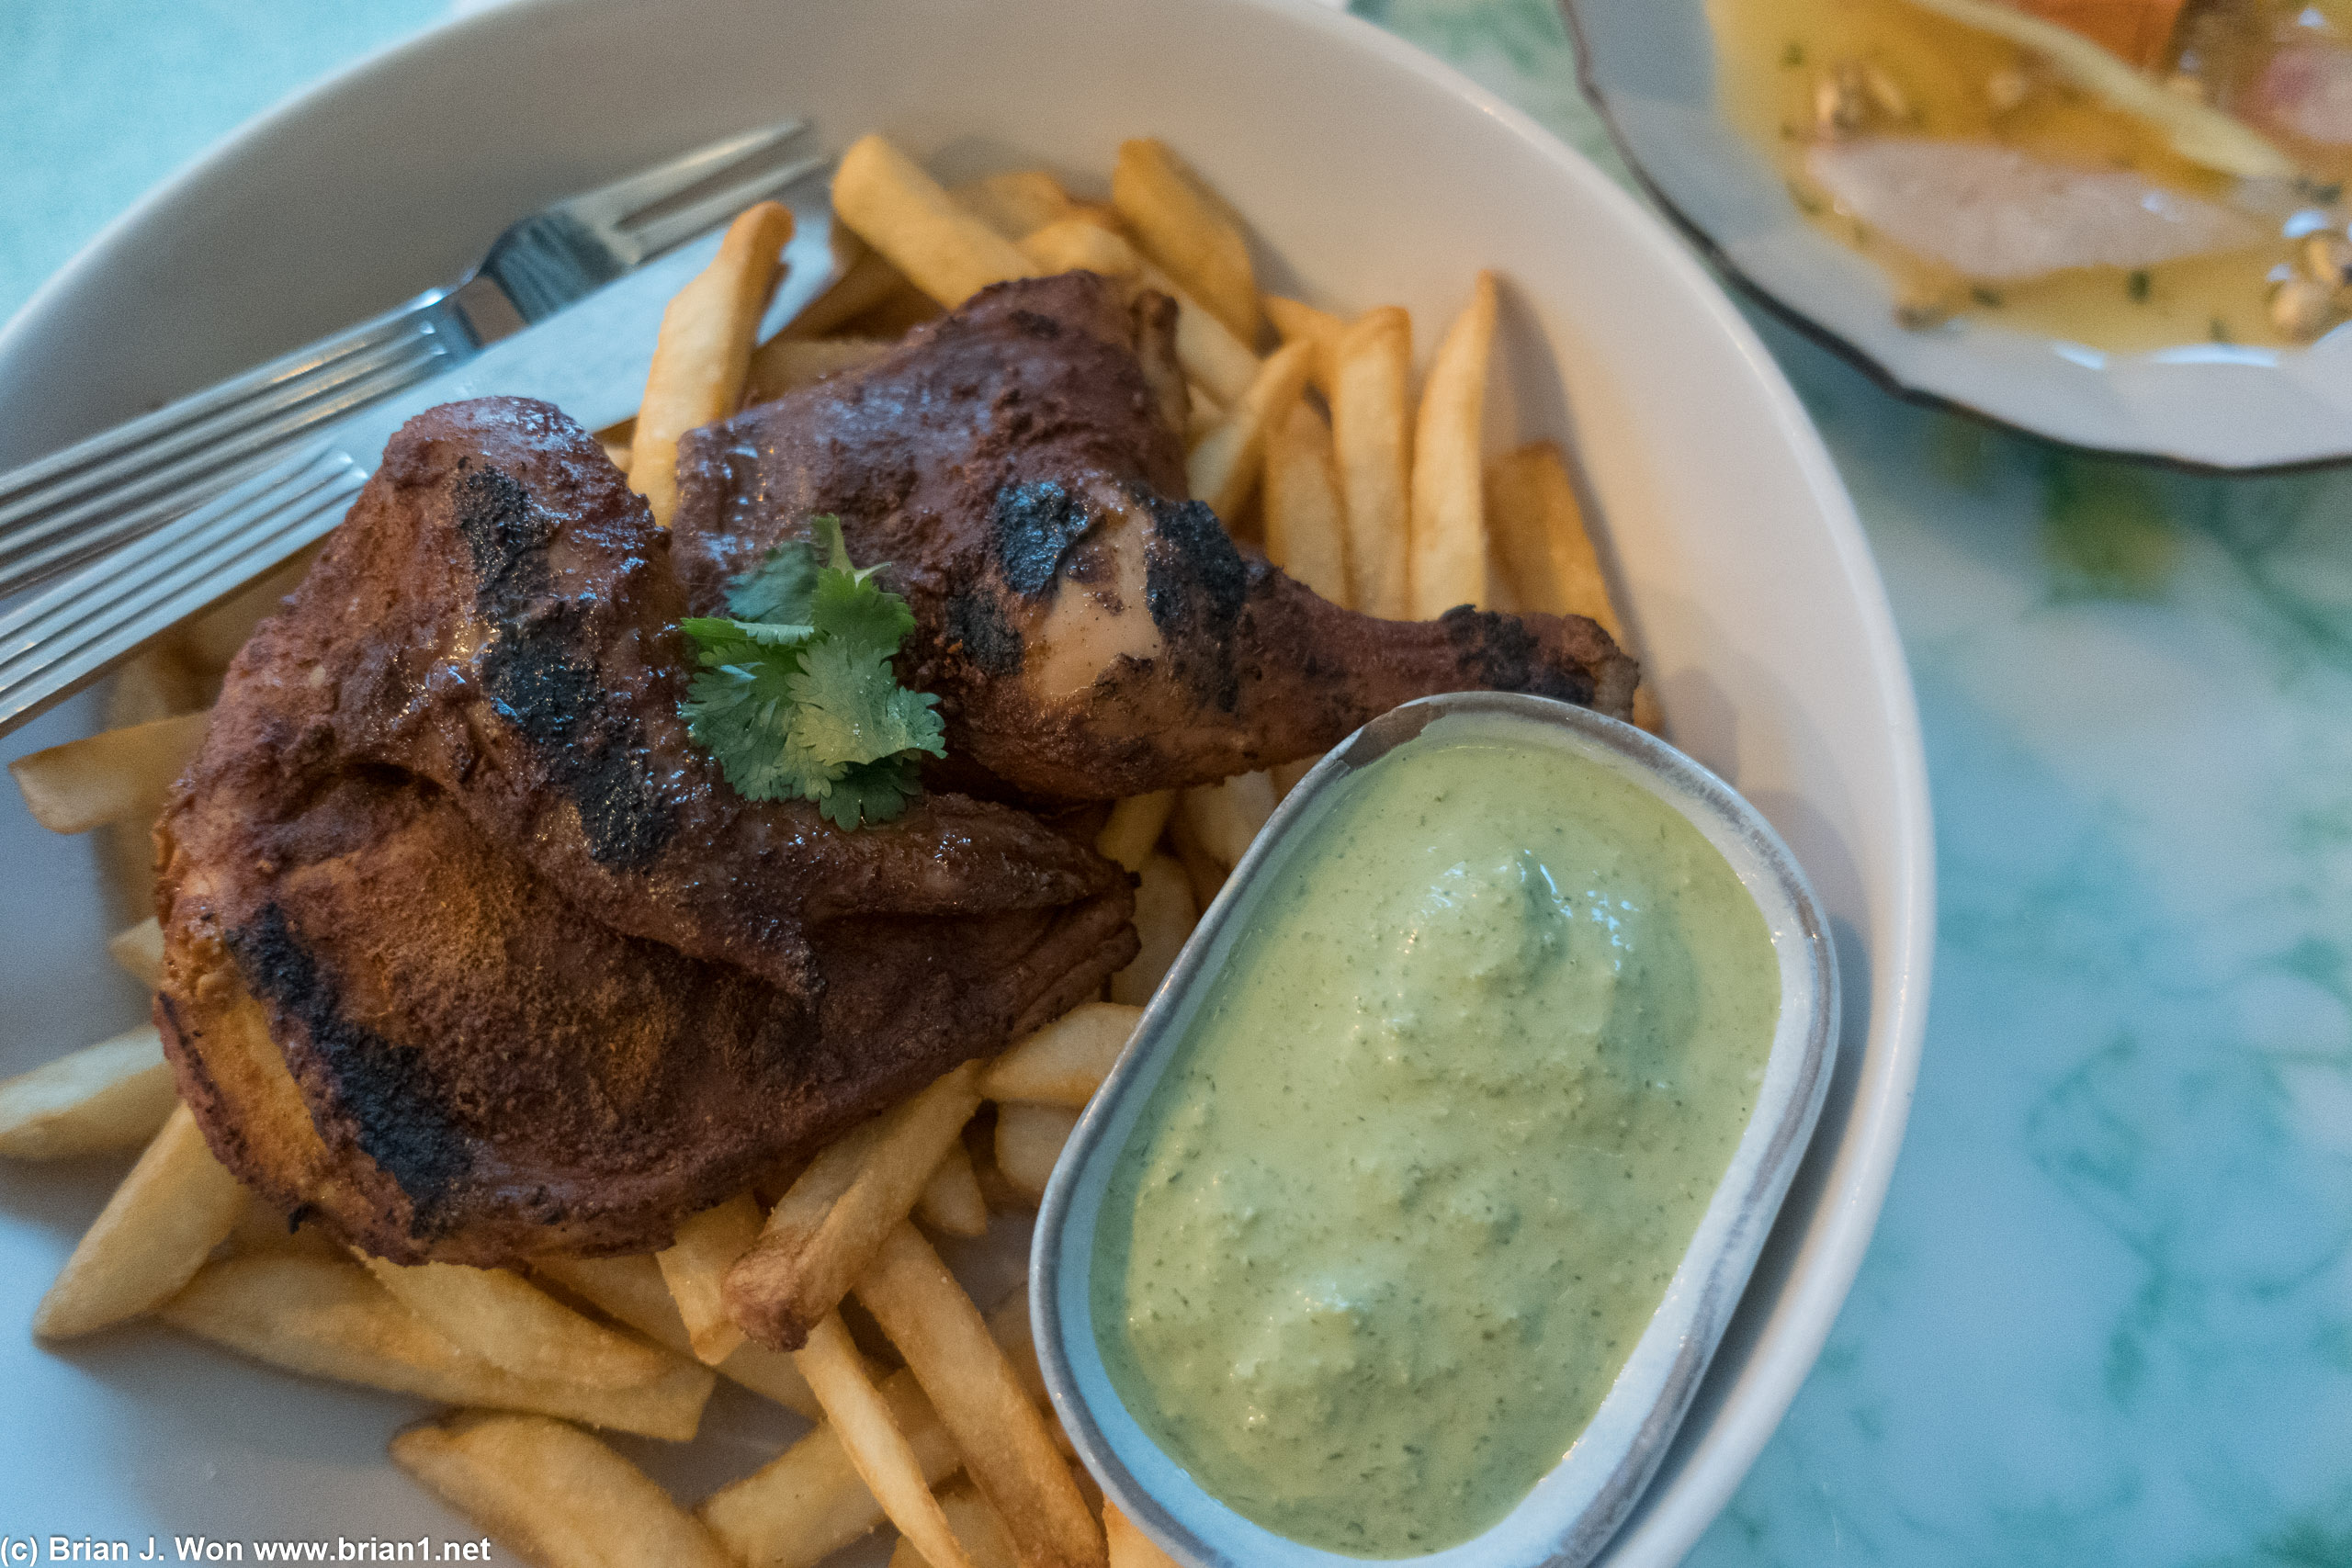 Pollo ala brasa was not very interesting, but at least the fries were perfectly cooked.